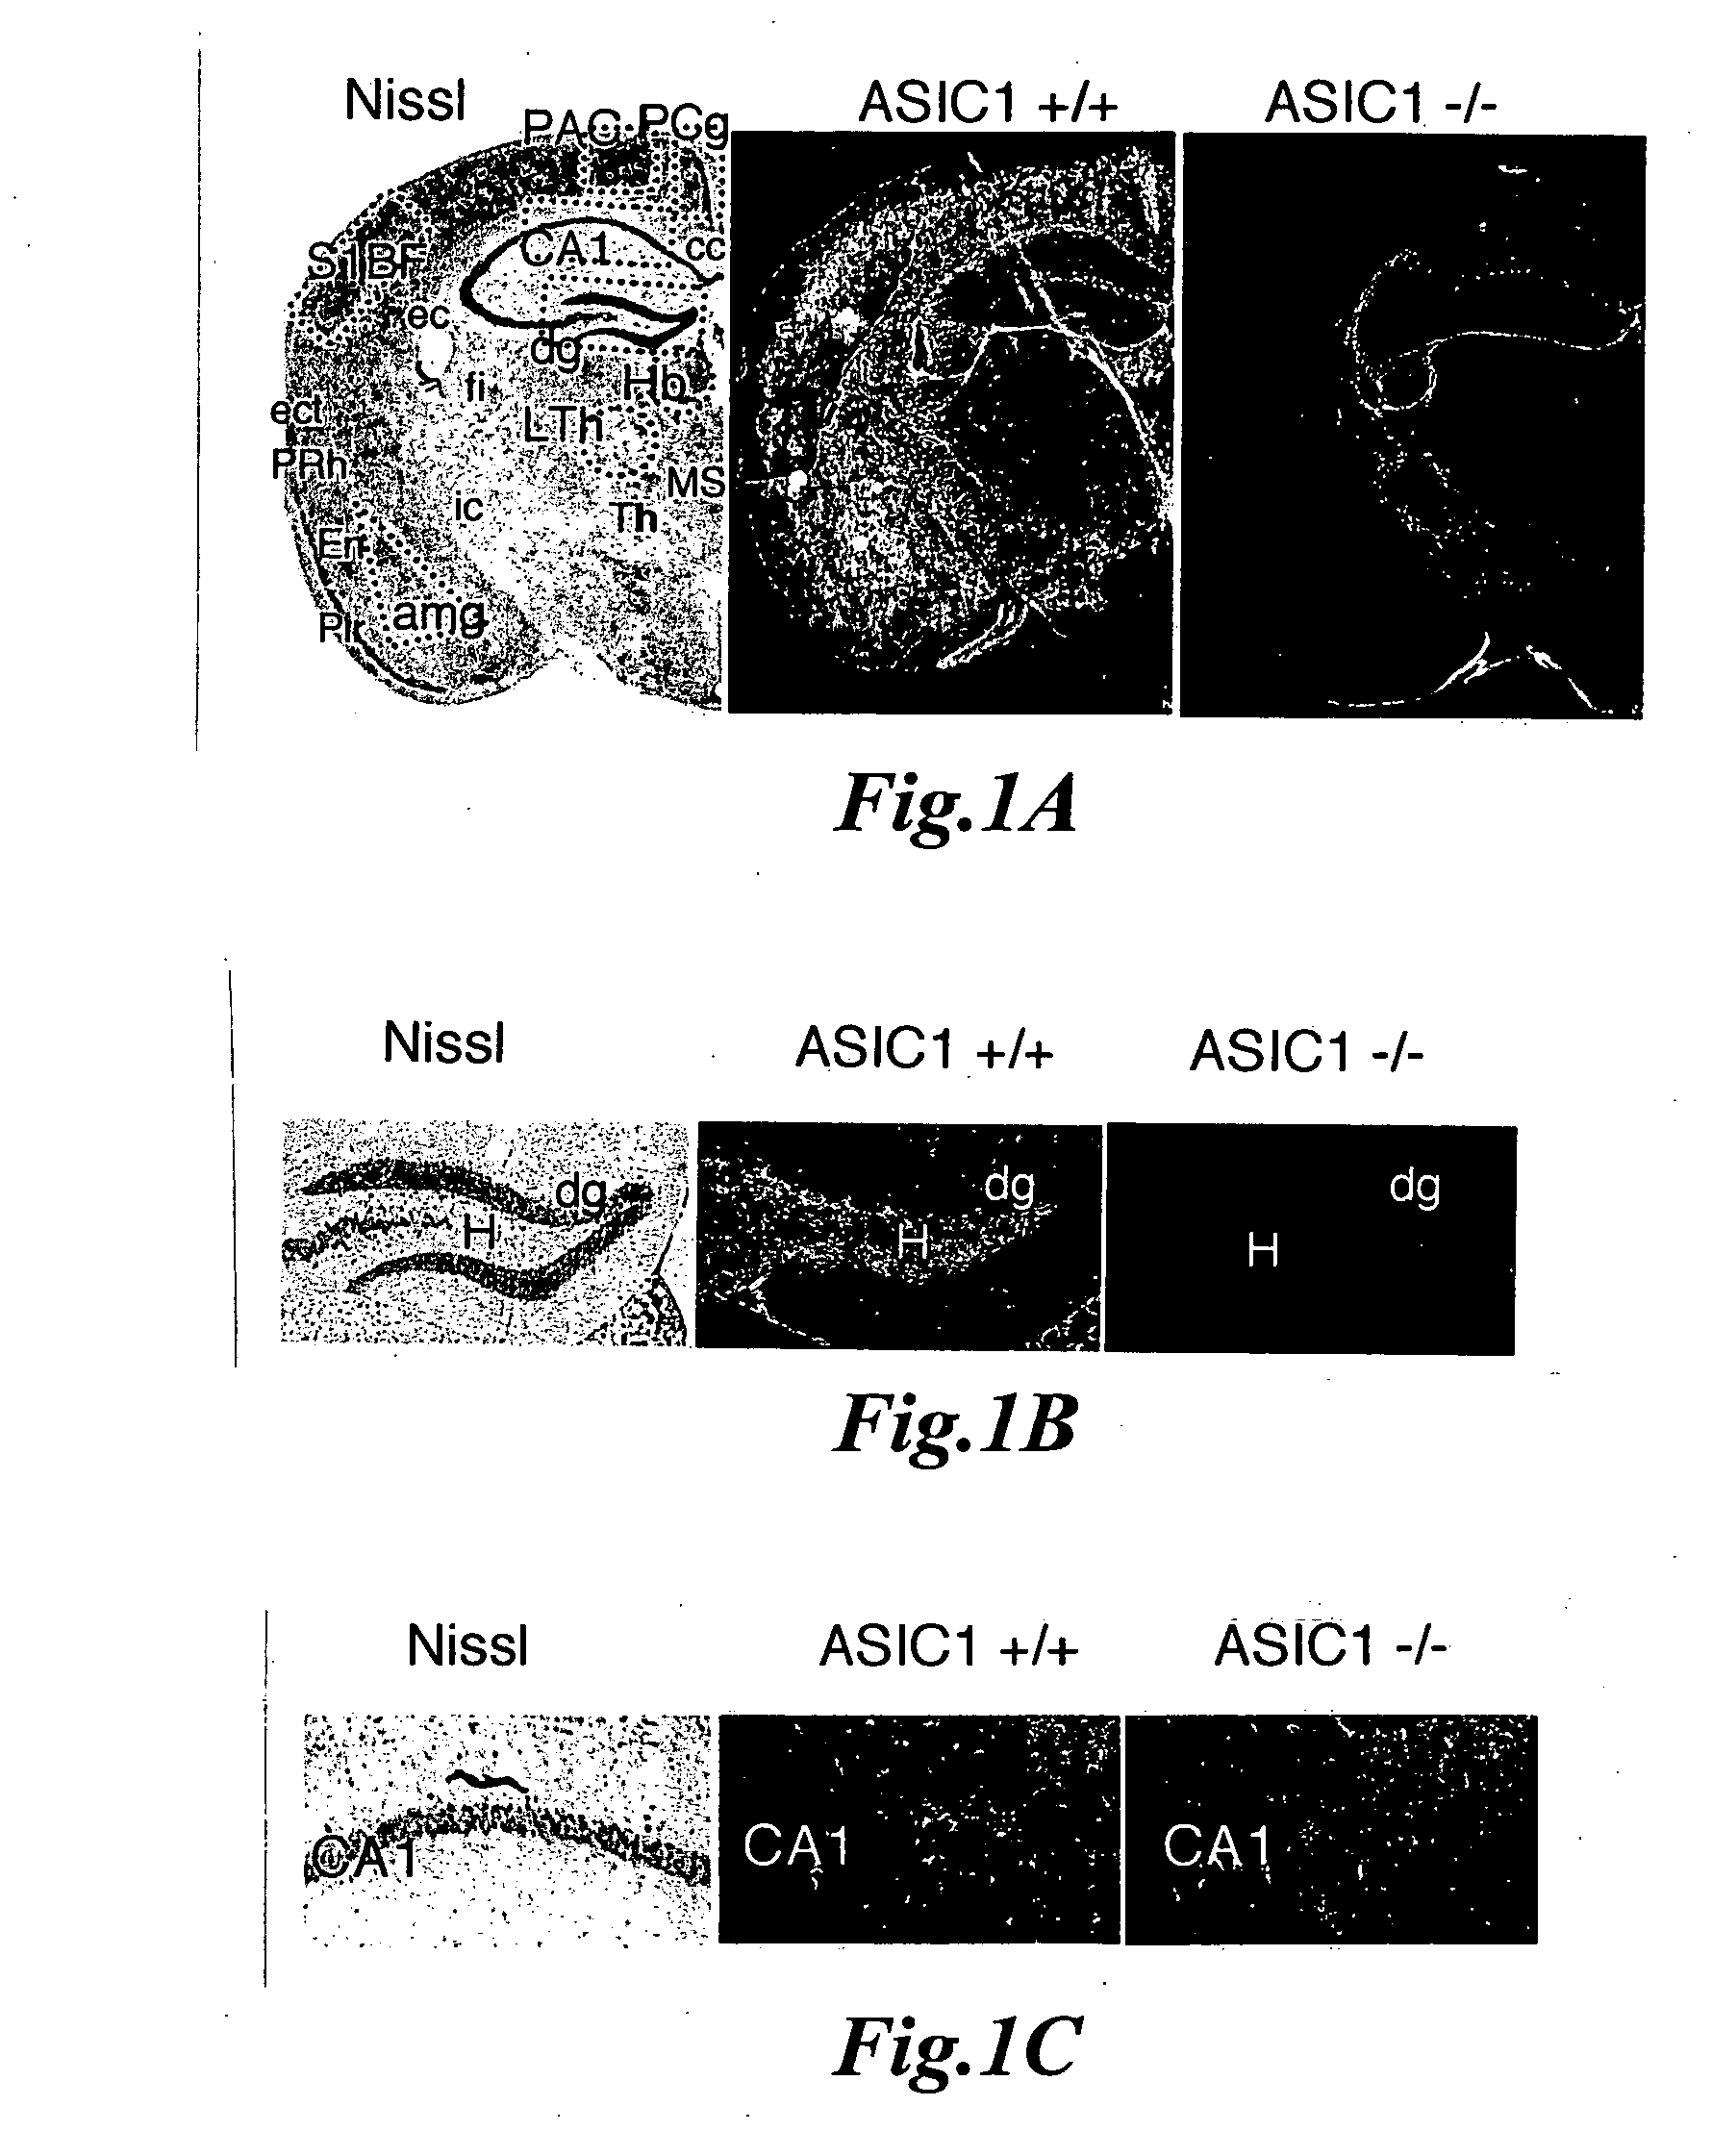 Novel compositions and methods for modulation of the acid-sensing ion channel (ASIC) for the treatment of anxiety and drug addiction